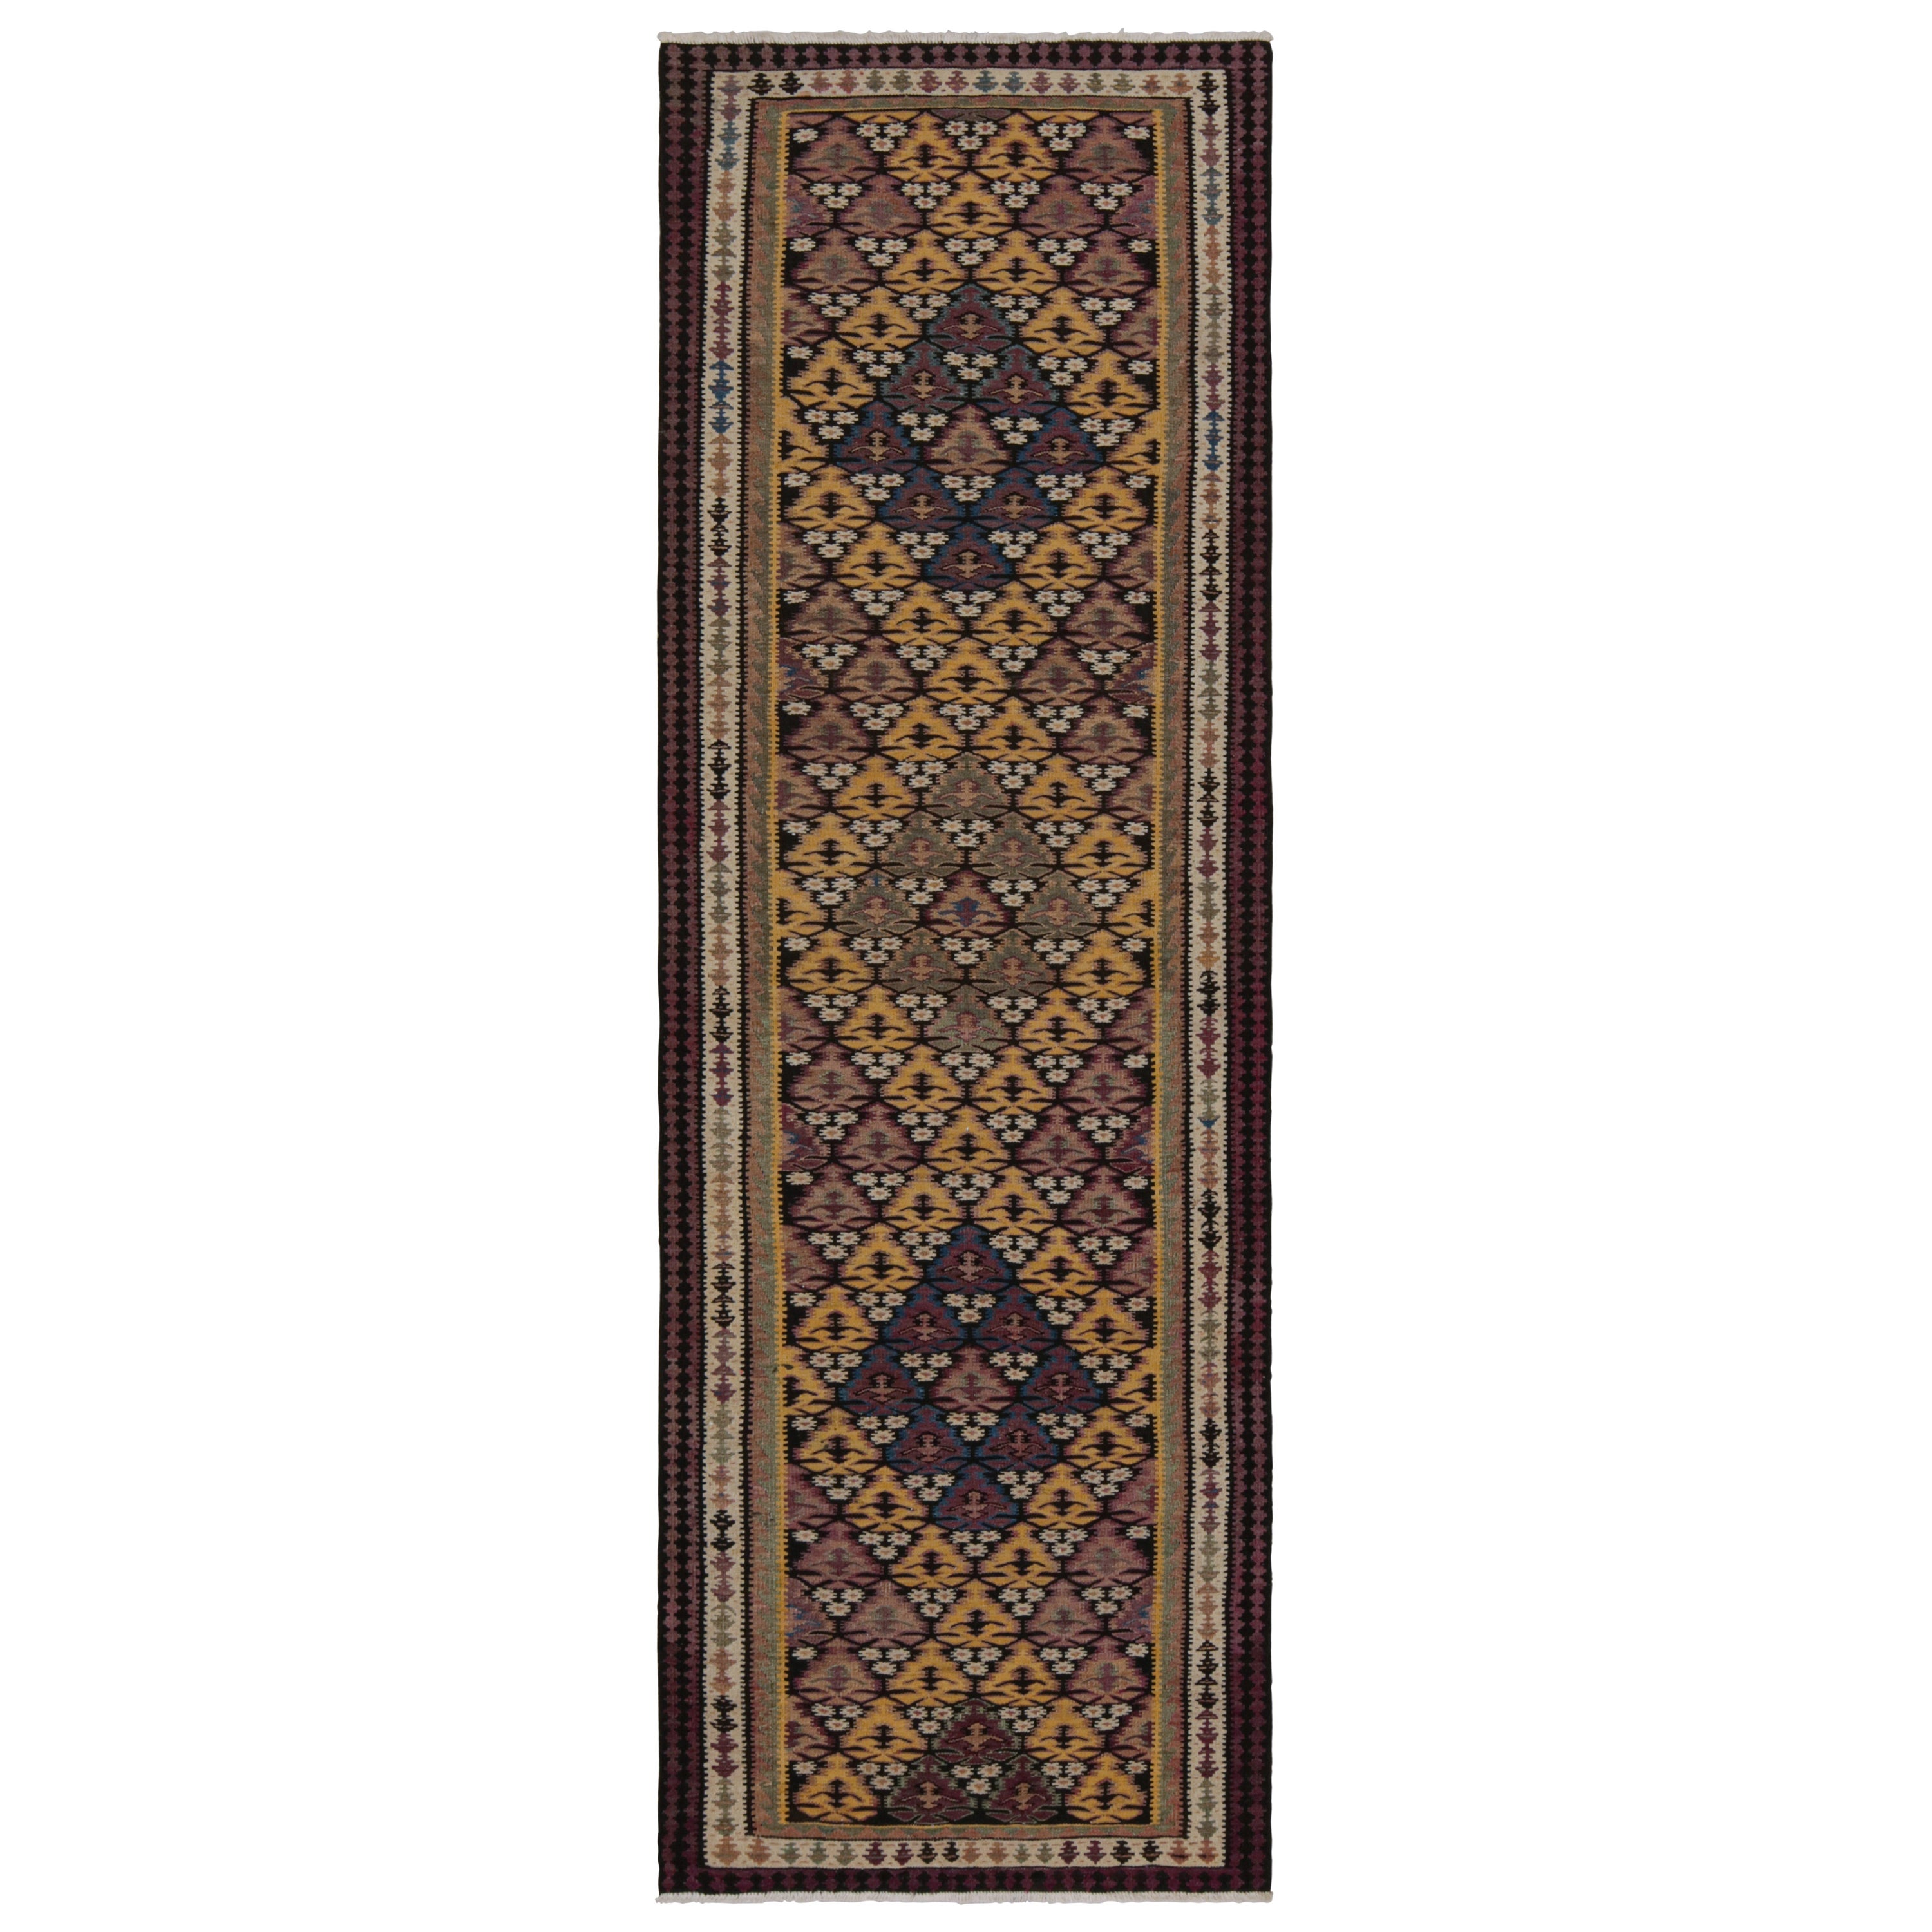 Vintage Persian Kilim in Polychromatic Geometric Patterns, from Rug & Kilim For Sale